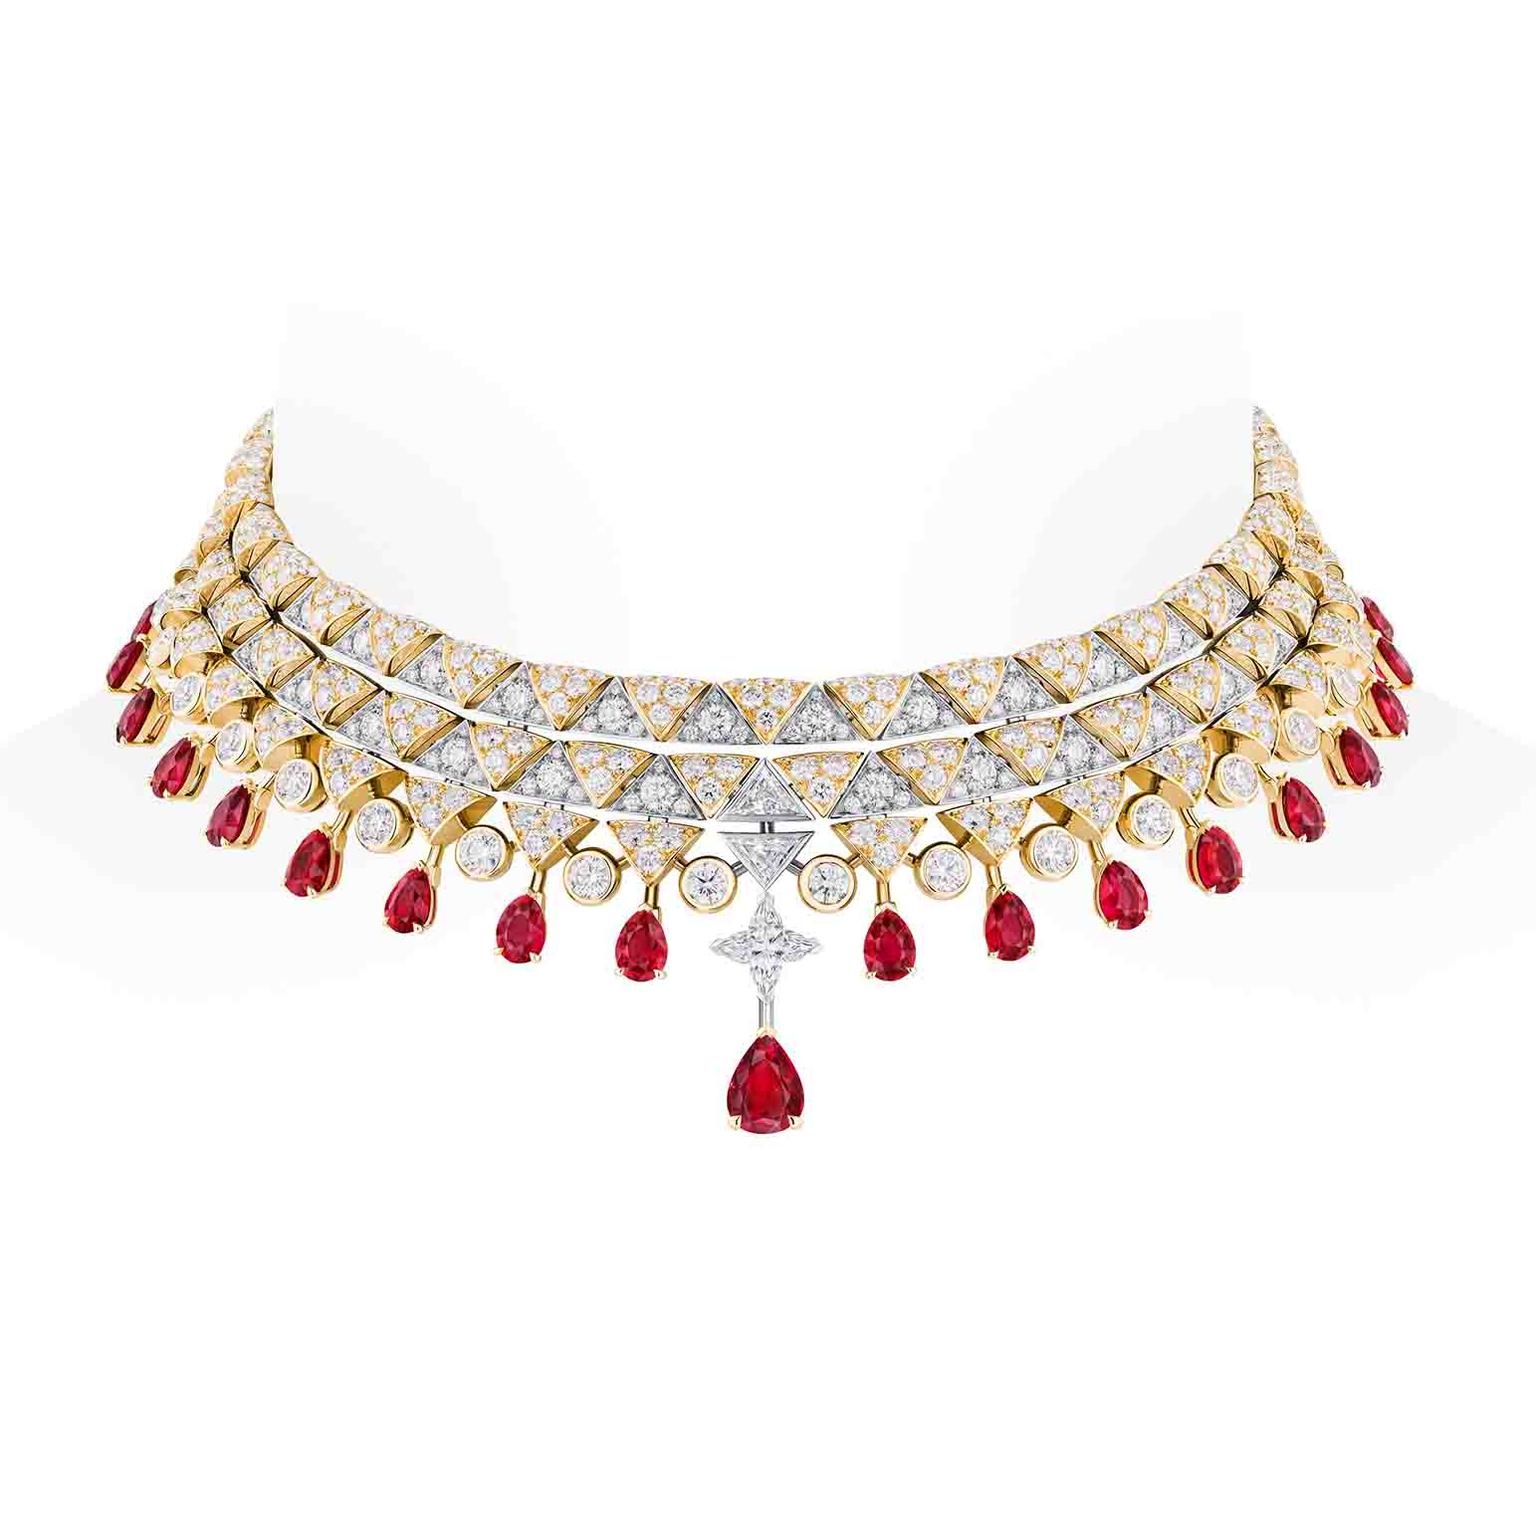 The Most Extraordinary High-Jewelry Collections That Debuted at